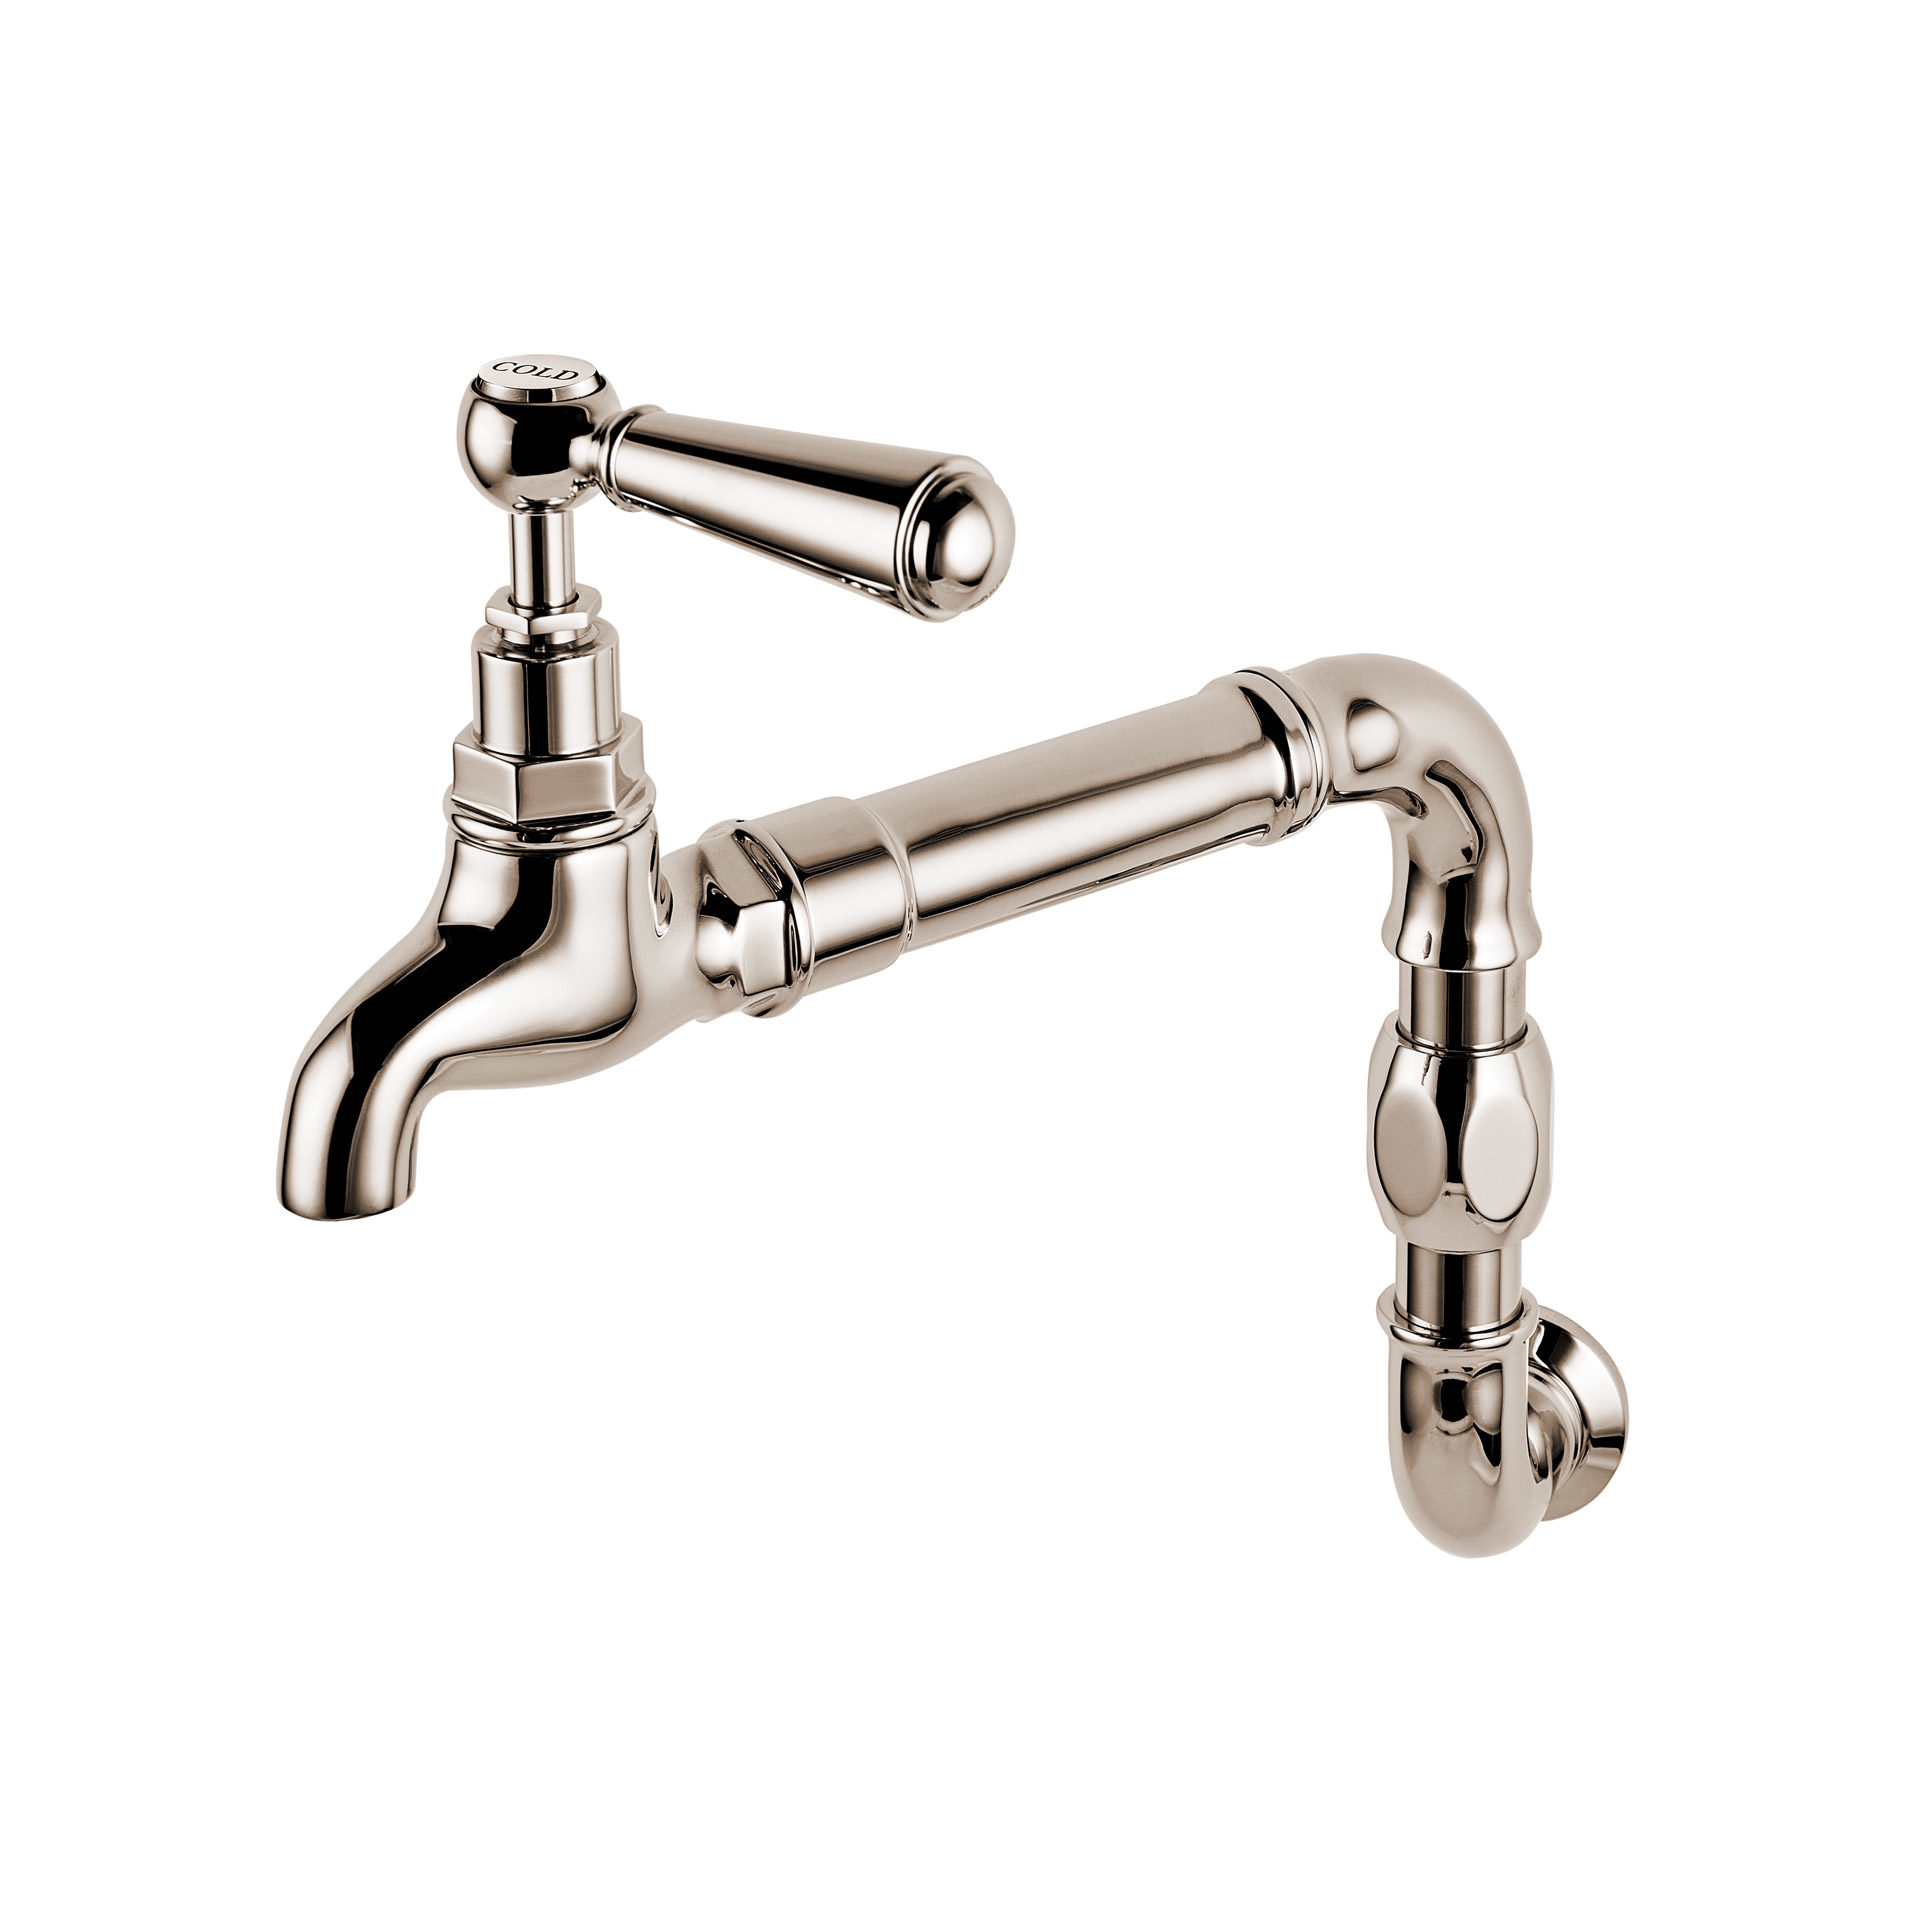 Wall mounted kitchen tap in polished nickel with lever